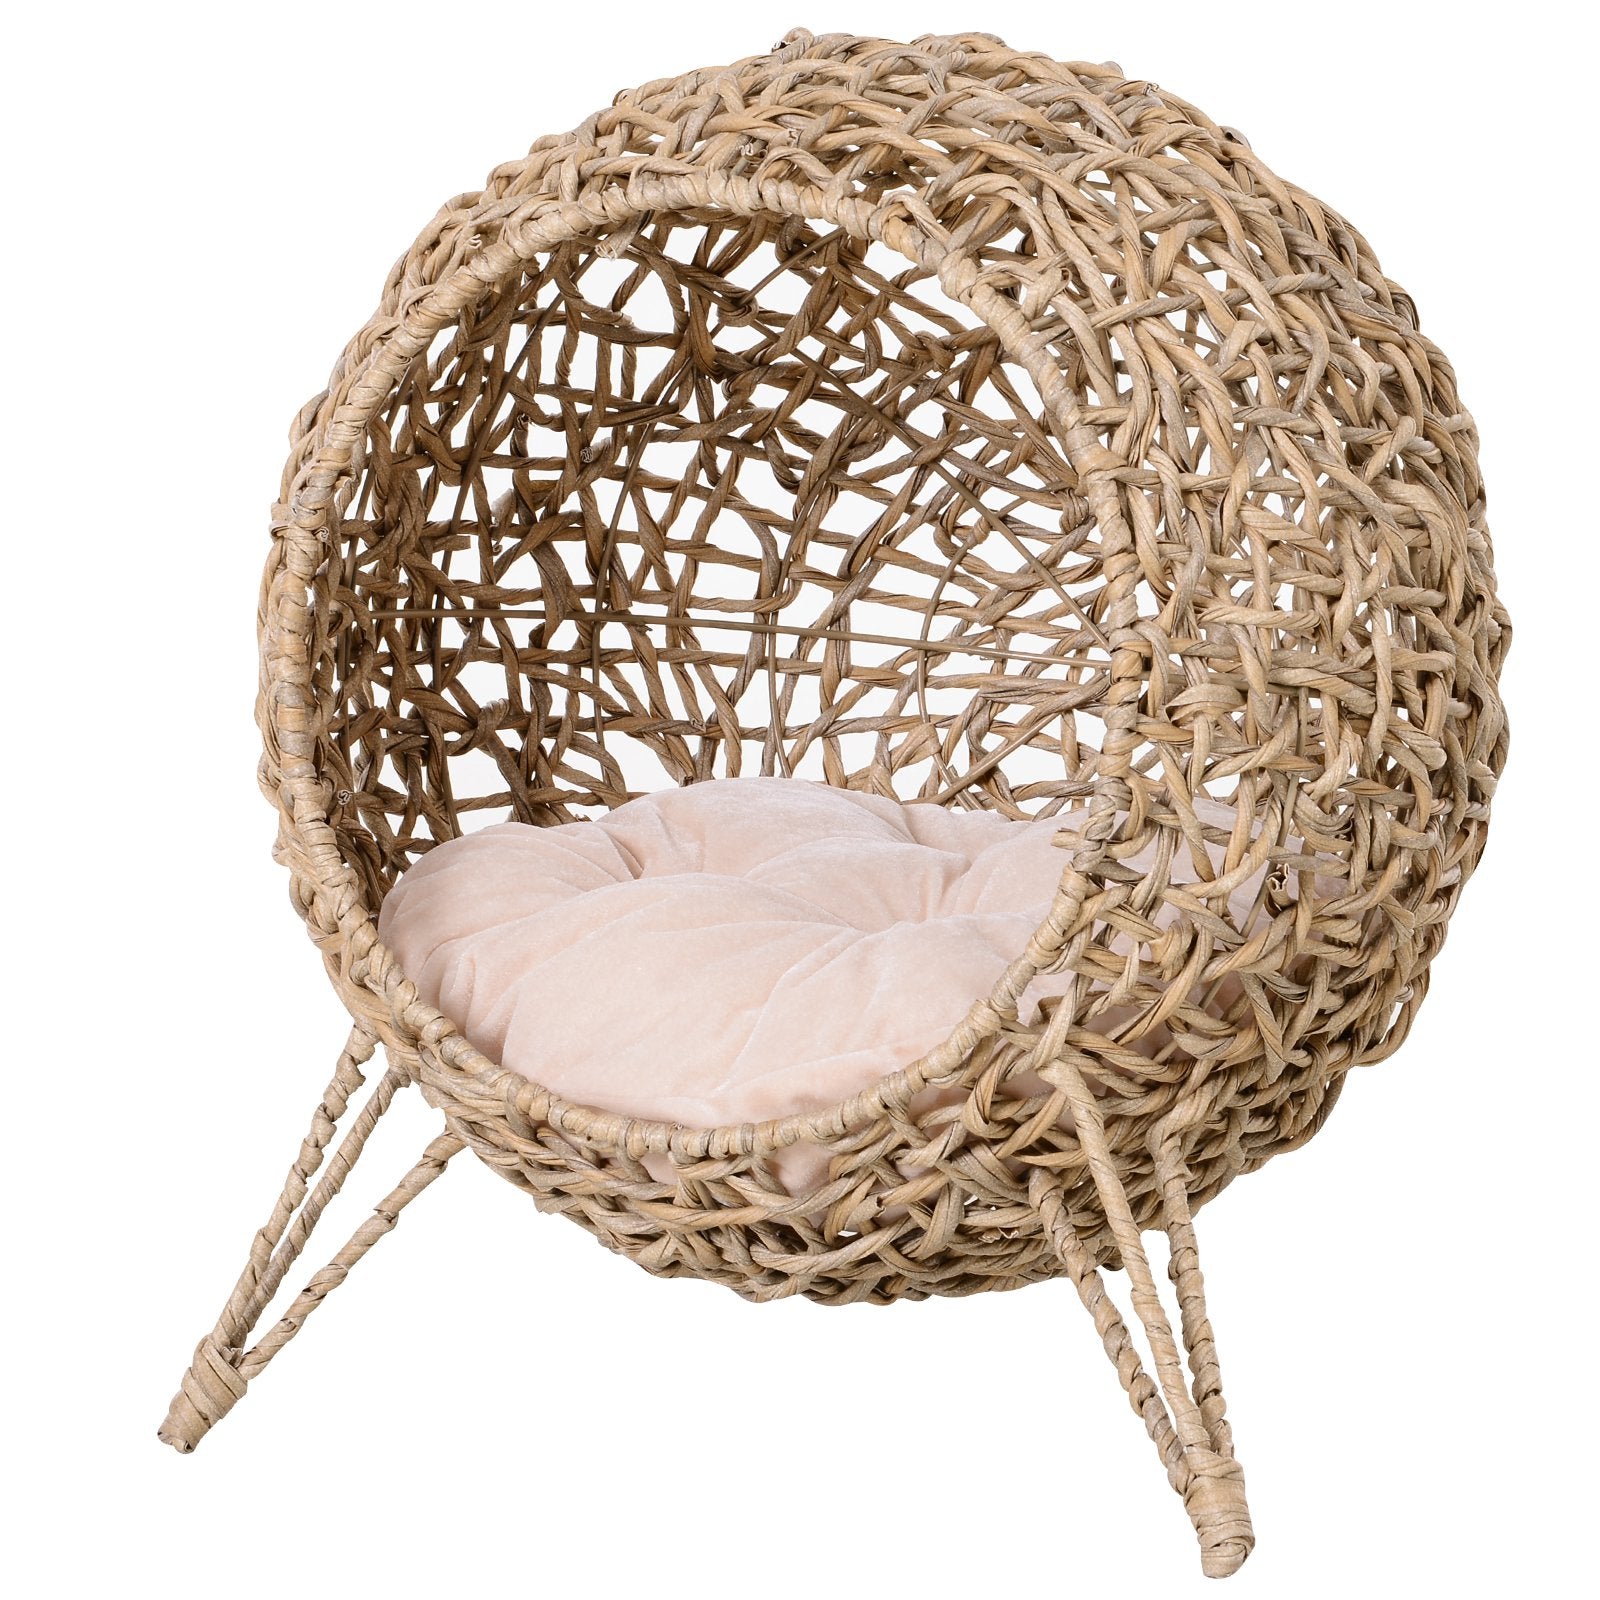 Cats Elevated Plastic Wicker Dome Bed